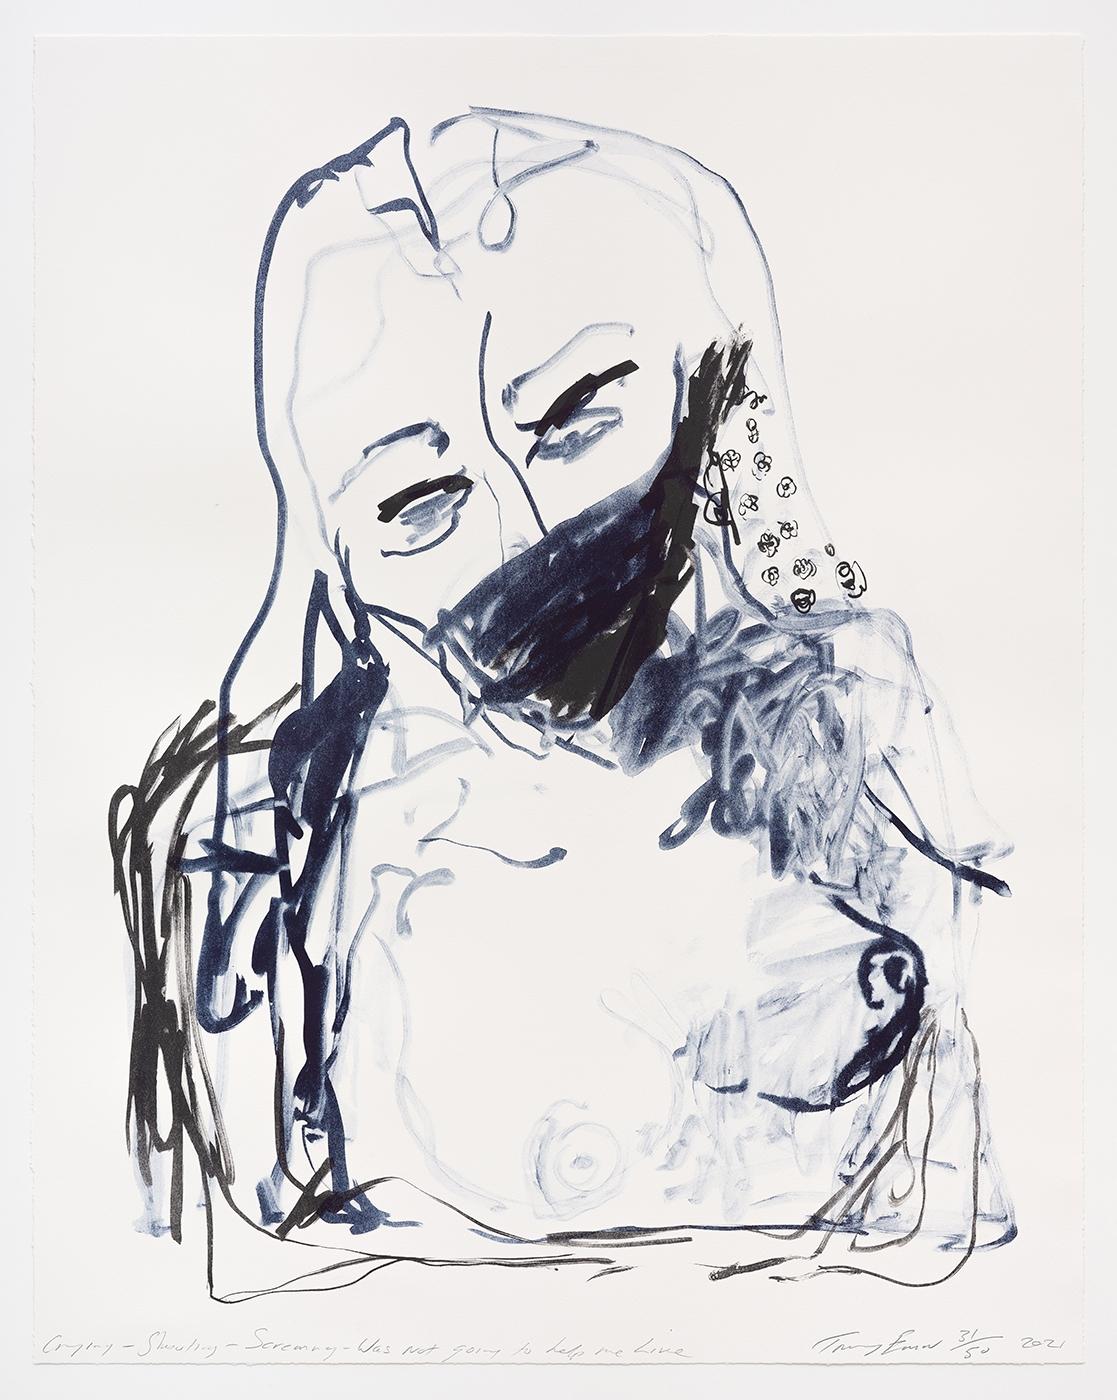 Tracey Emin
A Journey To Death (Portfolio of 10)
2021
2 colour lithograph on Somerset Velvet Warm White 400 gsm
94 × 74 cm (37 × 29.1 in)
Each signed, numbered and dated by the artist
Edition of 50
In mint condition

PLEASE NOTE: Images of edition